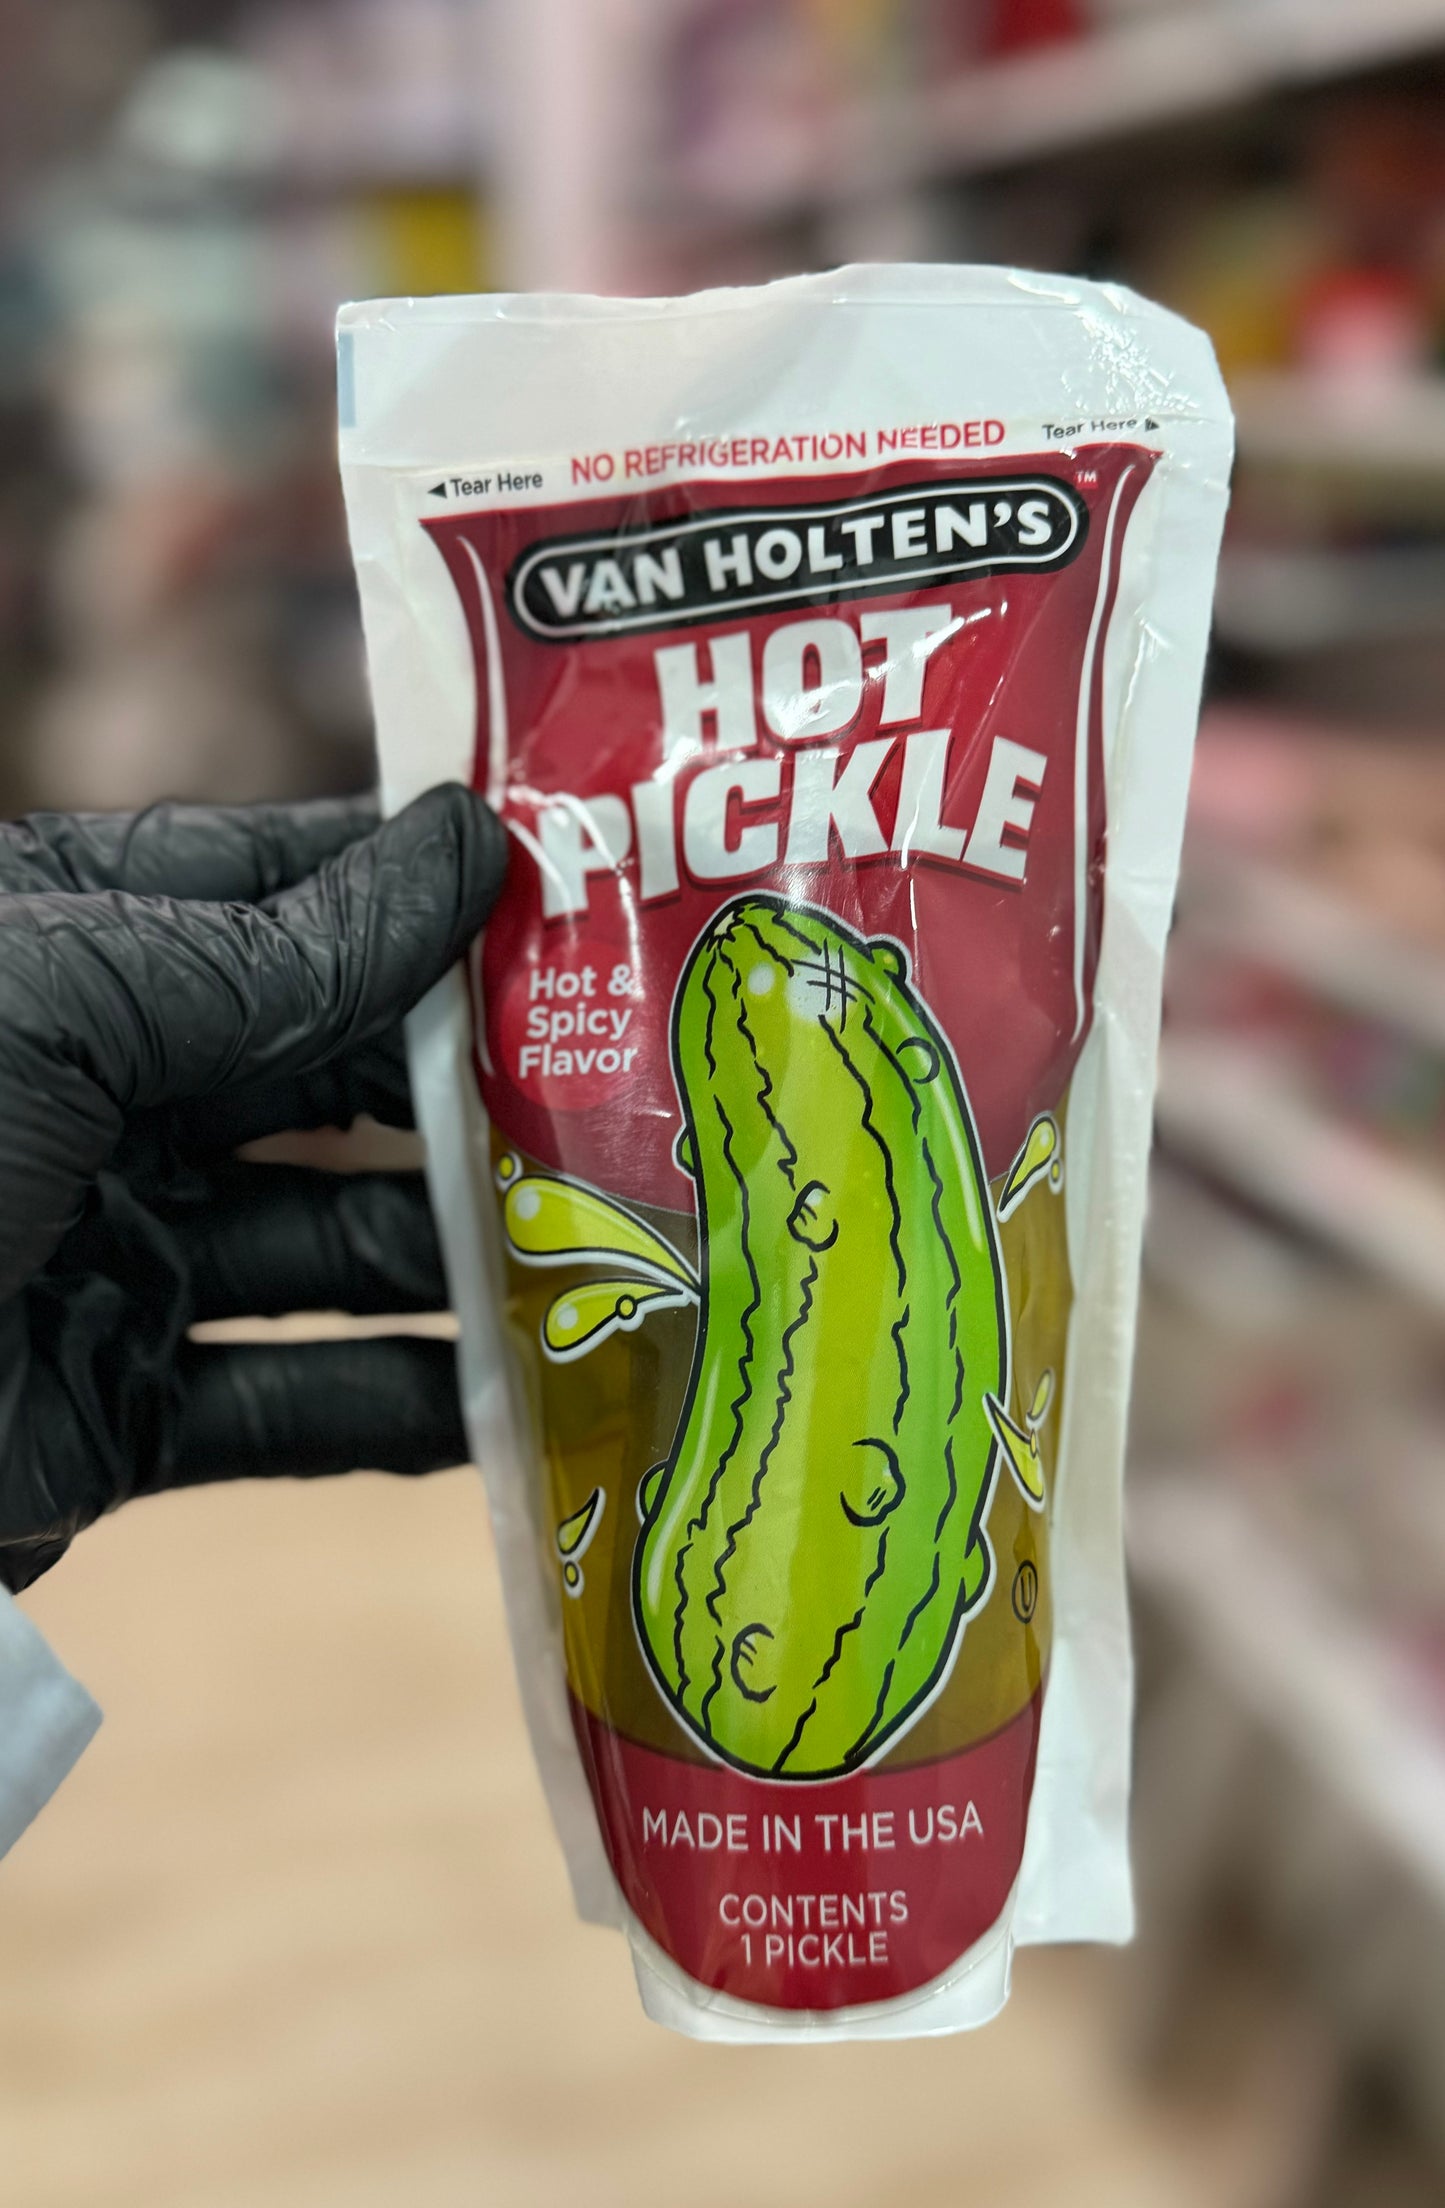 Hot pickle